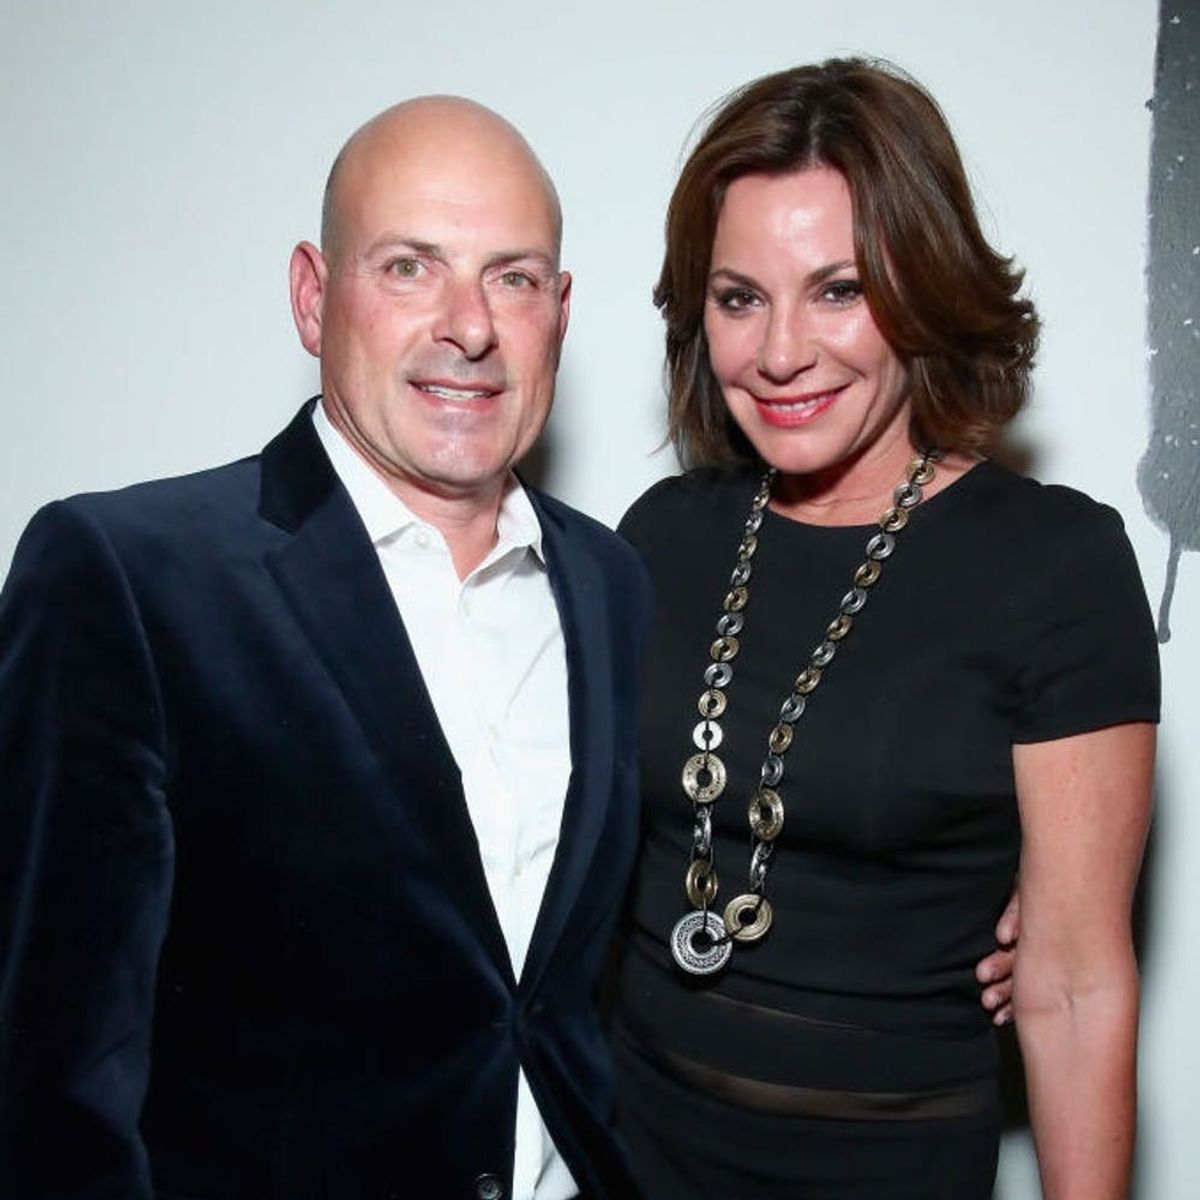 RHONY Star Luann D’Agostino Defends Her Marriage After Public “Lovers’ Quarrel”